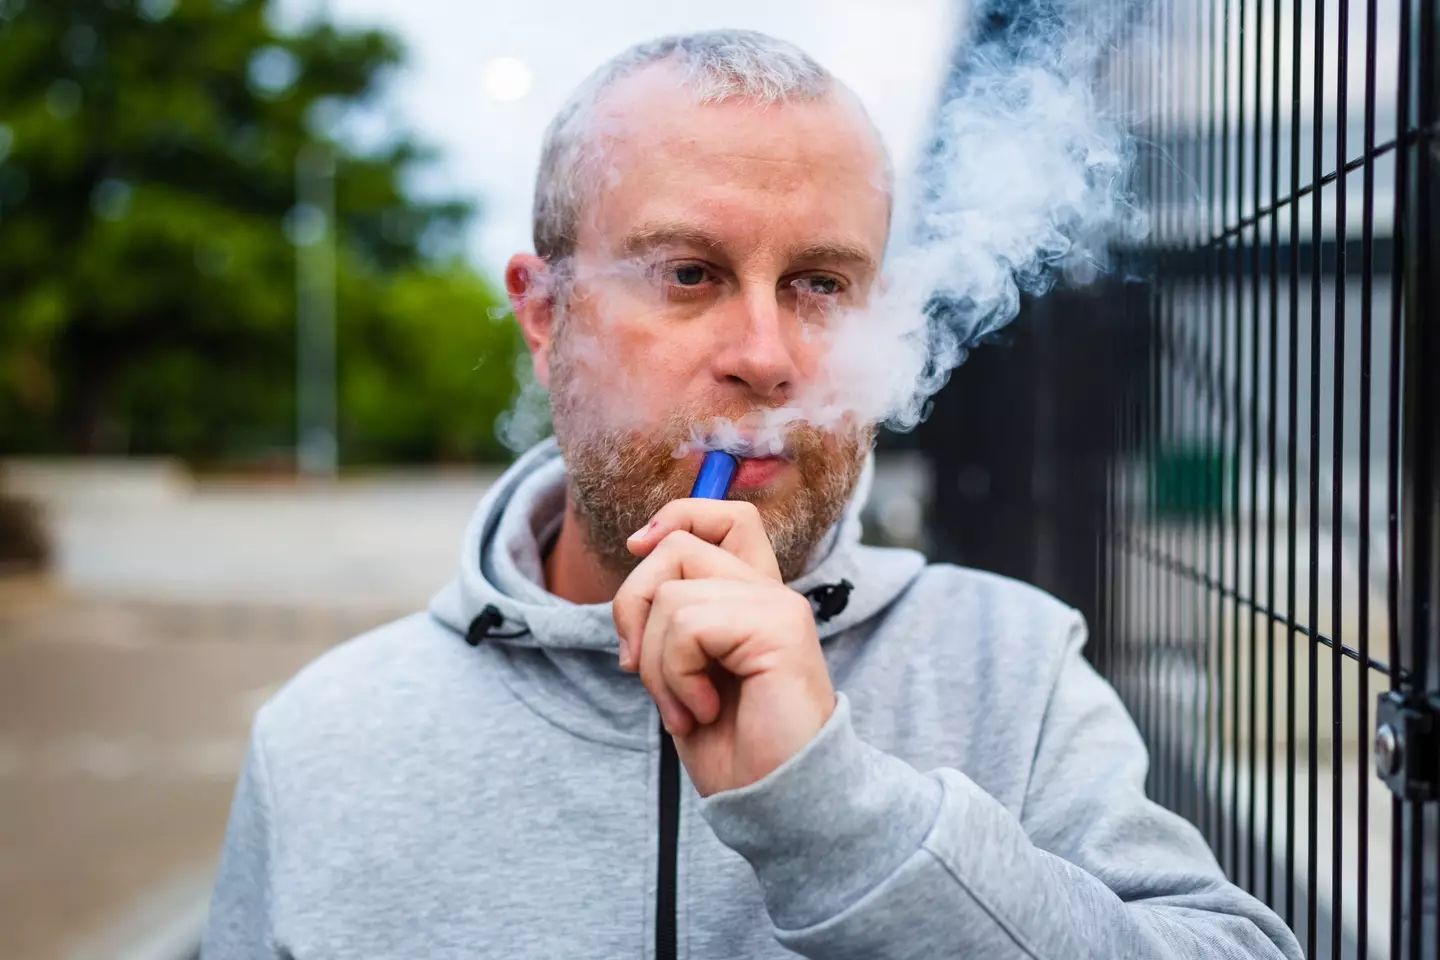 Quitting vaping will drastically improve your health.